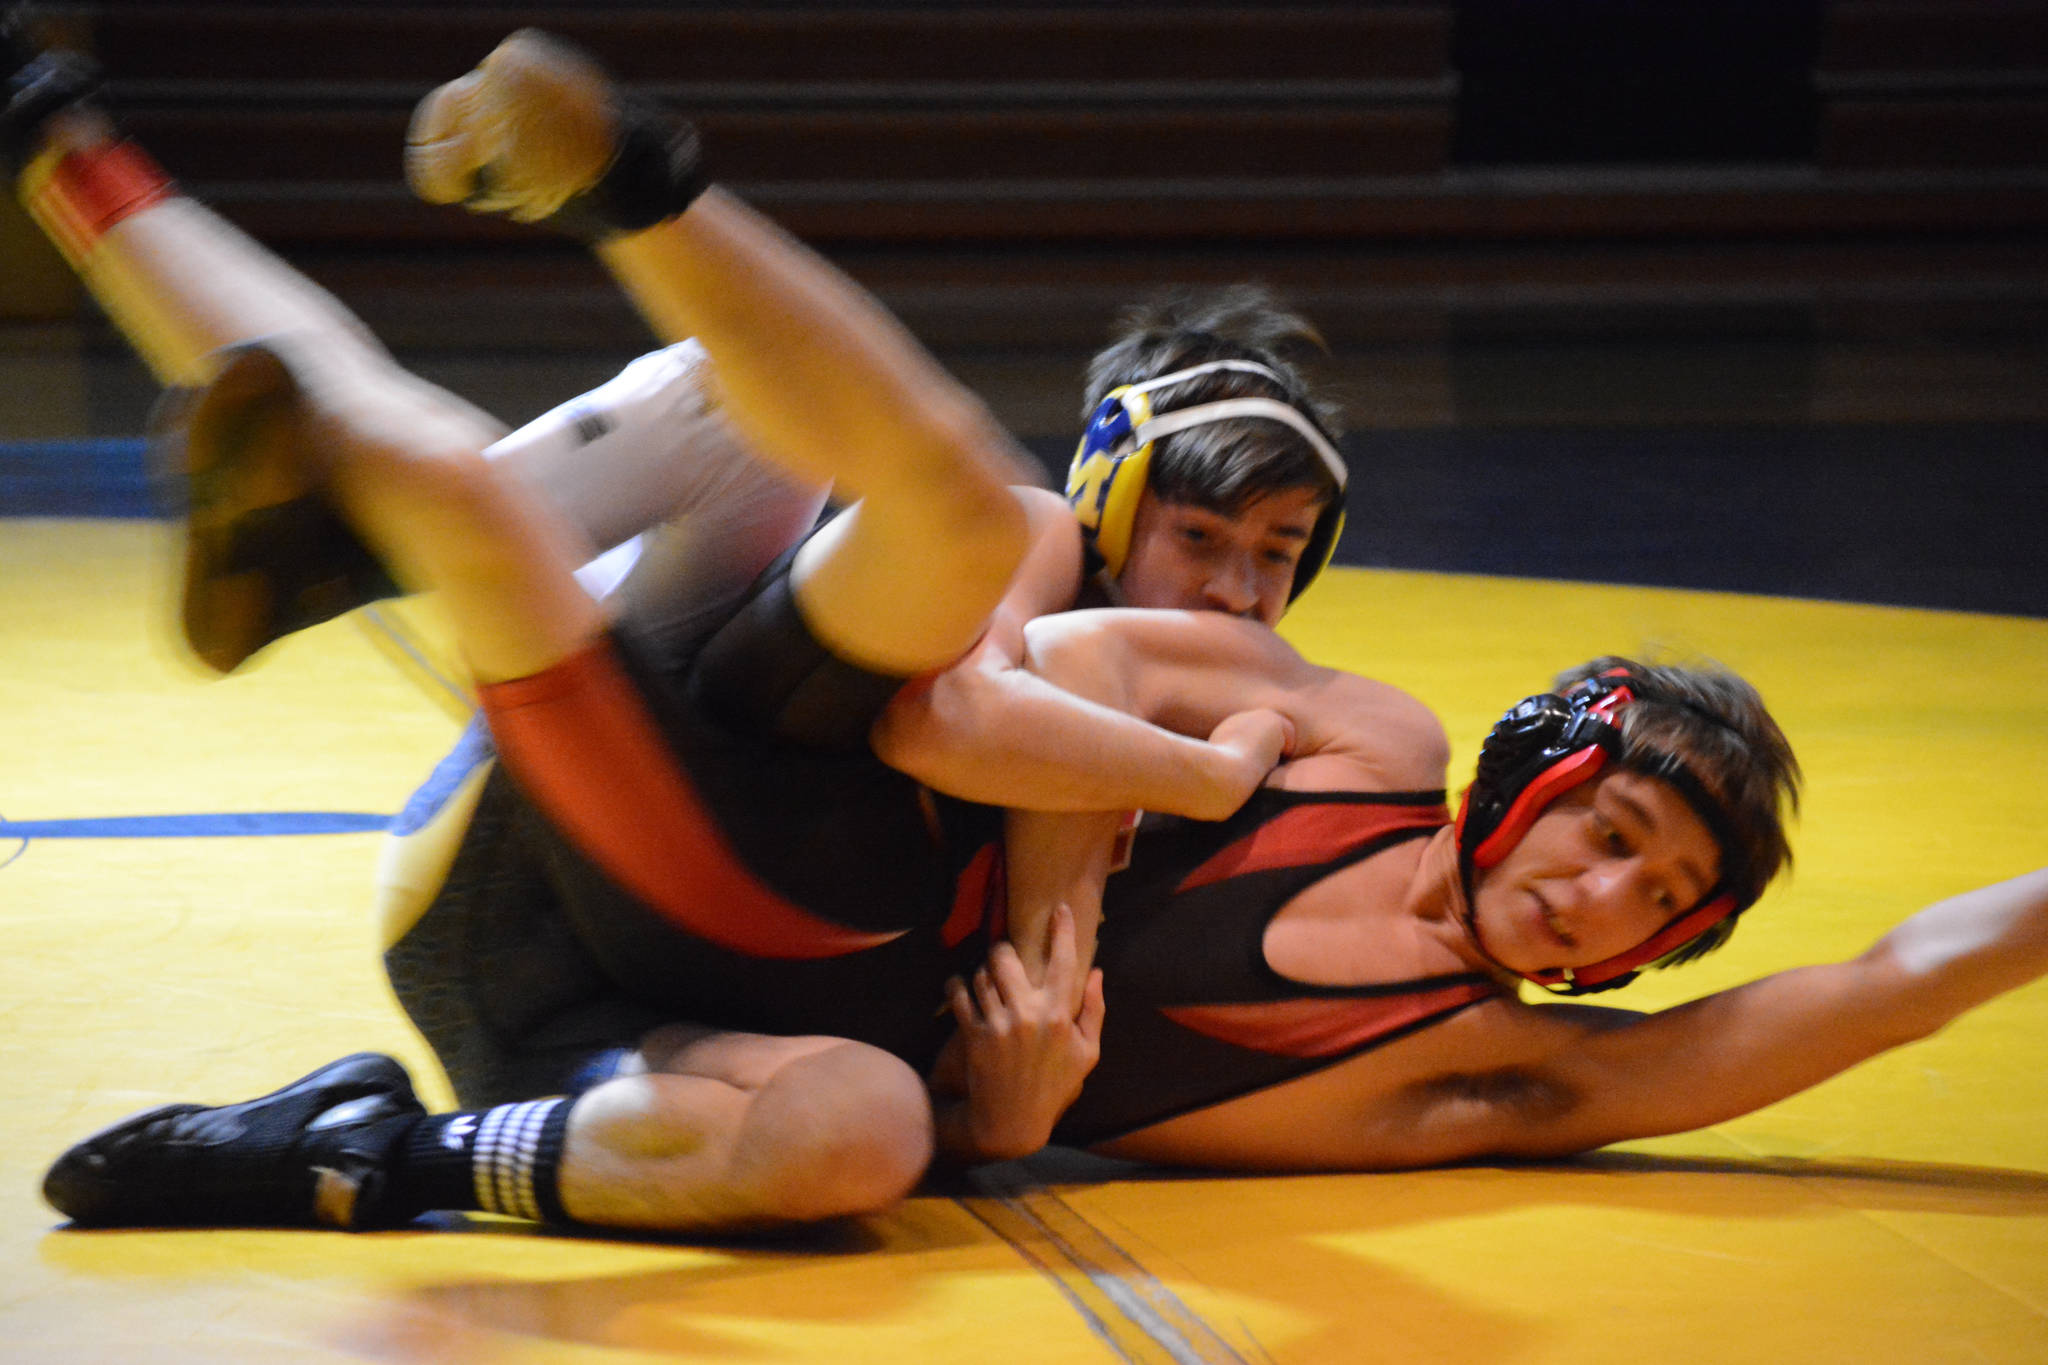 Homer High School Mariner Seth Inama, top, wrestles with Kenai High School Kardinal Daemon Duniphin, bottom, in a meet held Wednesday, Nov. 21, 2018, at the Homer High School Alice Witte Gym in Homer, Alaska. (Photo by Michael Armstrong/Homer News)